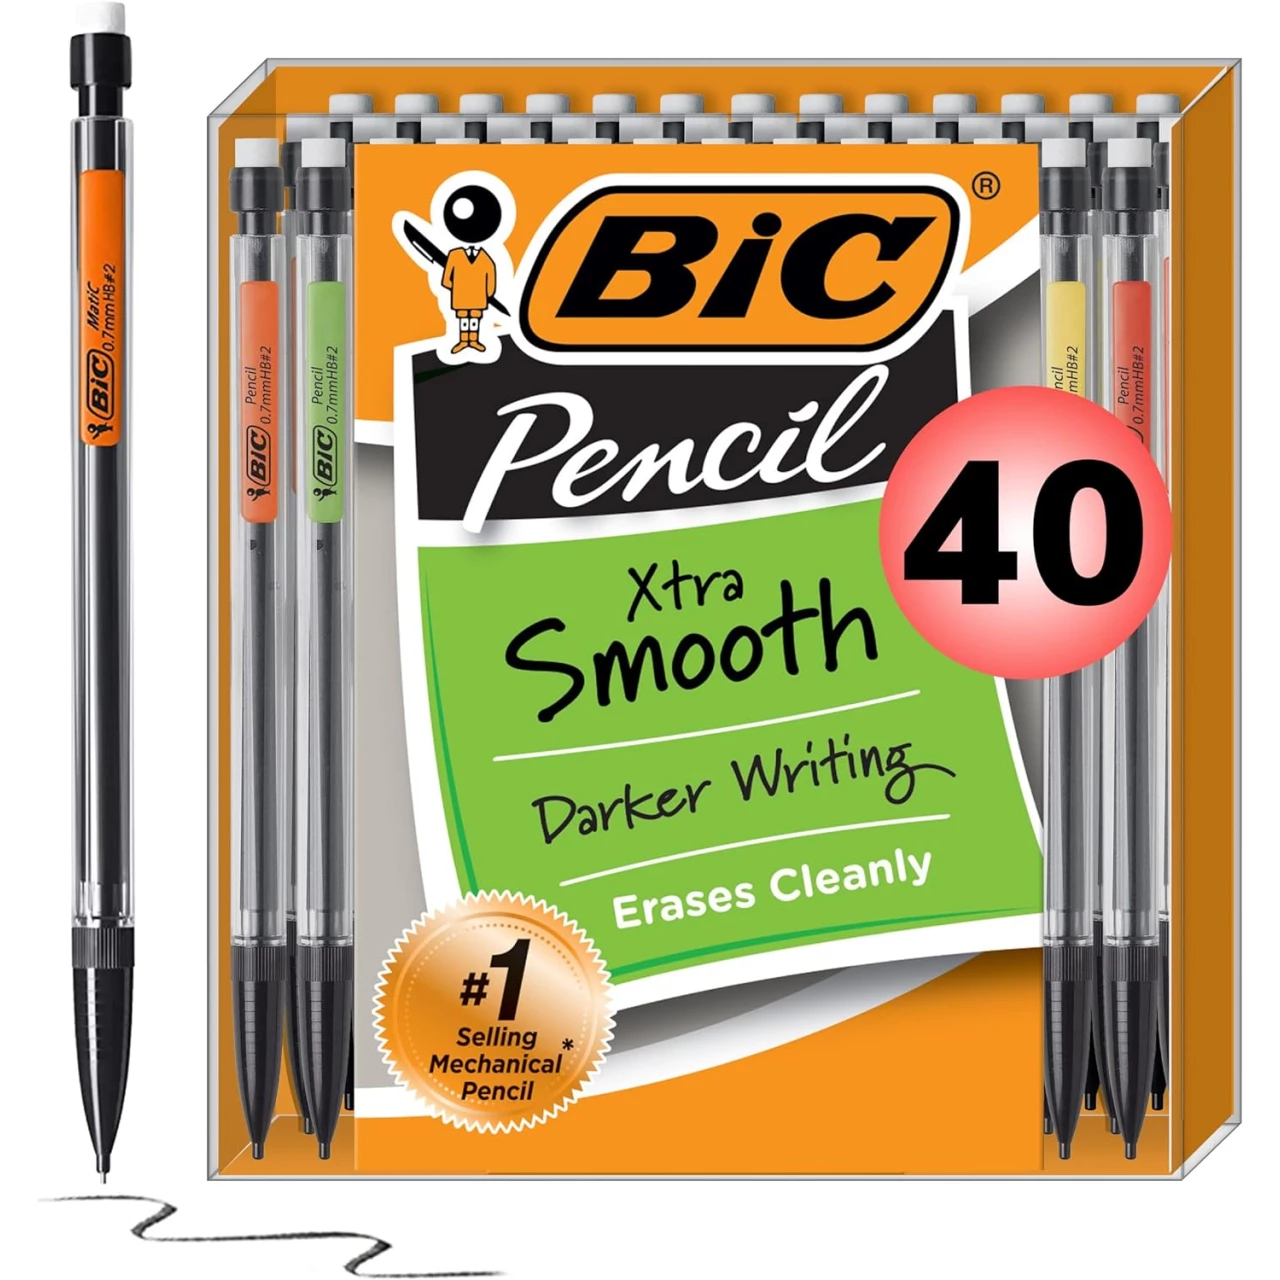 BIC Xtra-Smooth Mech. Pencil, Med. Point (0.7mm), 40-Count